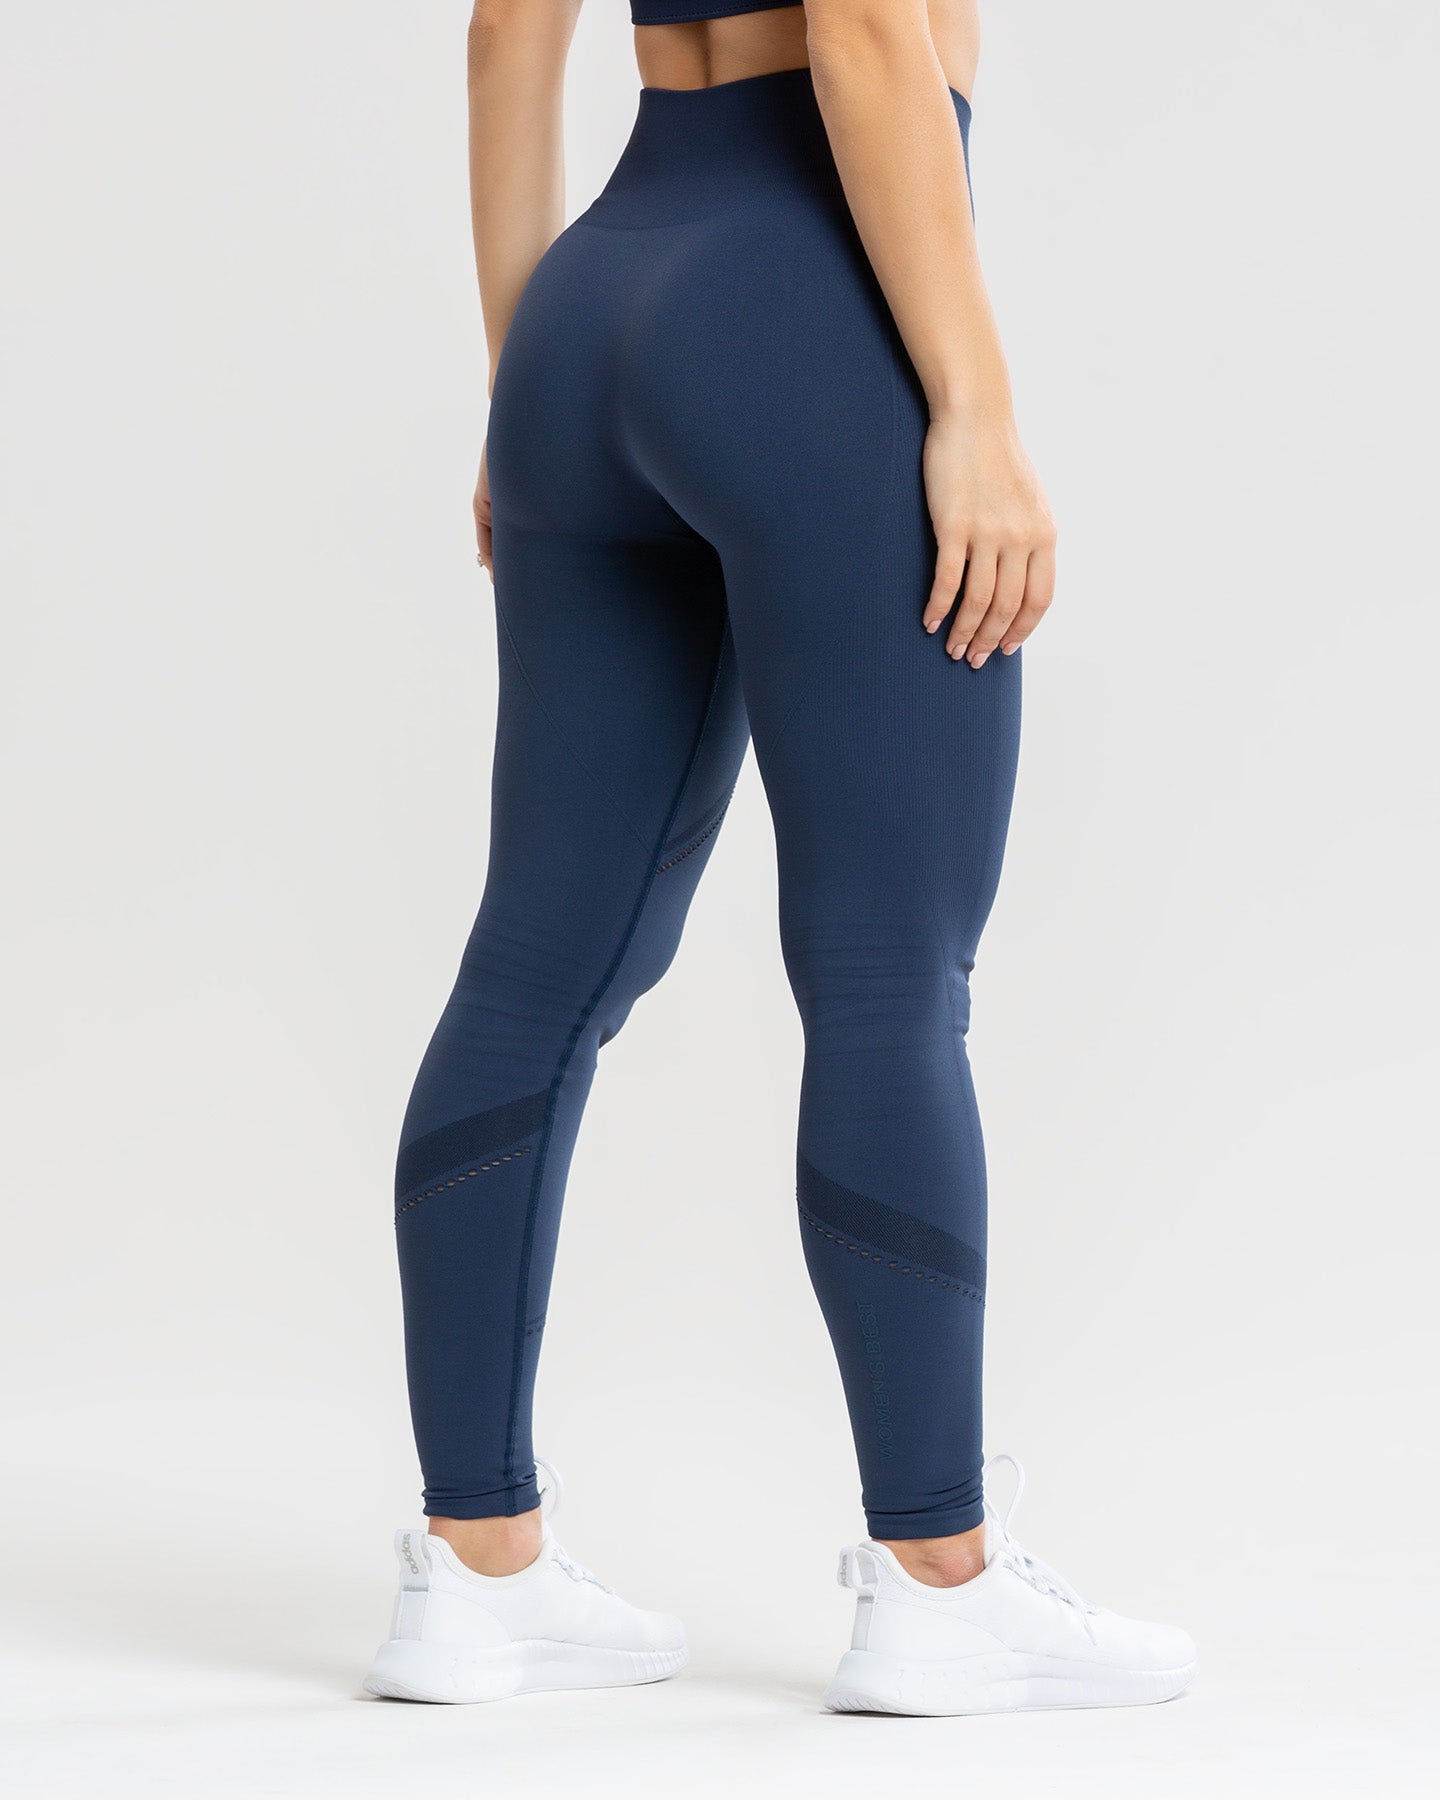 3/4 Length Twin Birds Legging Royal Blue Online Shopping At Lowest Price In  India With Discounts